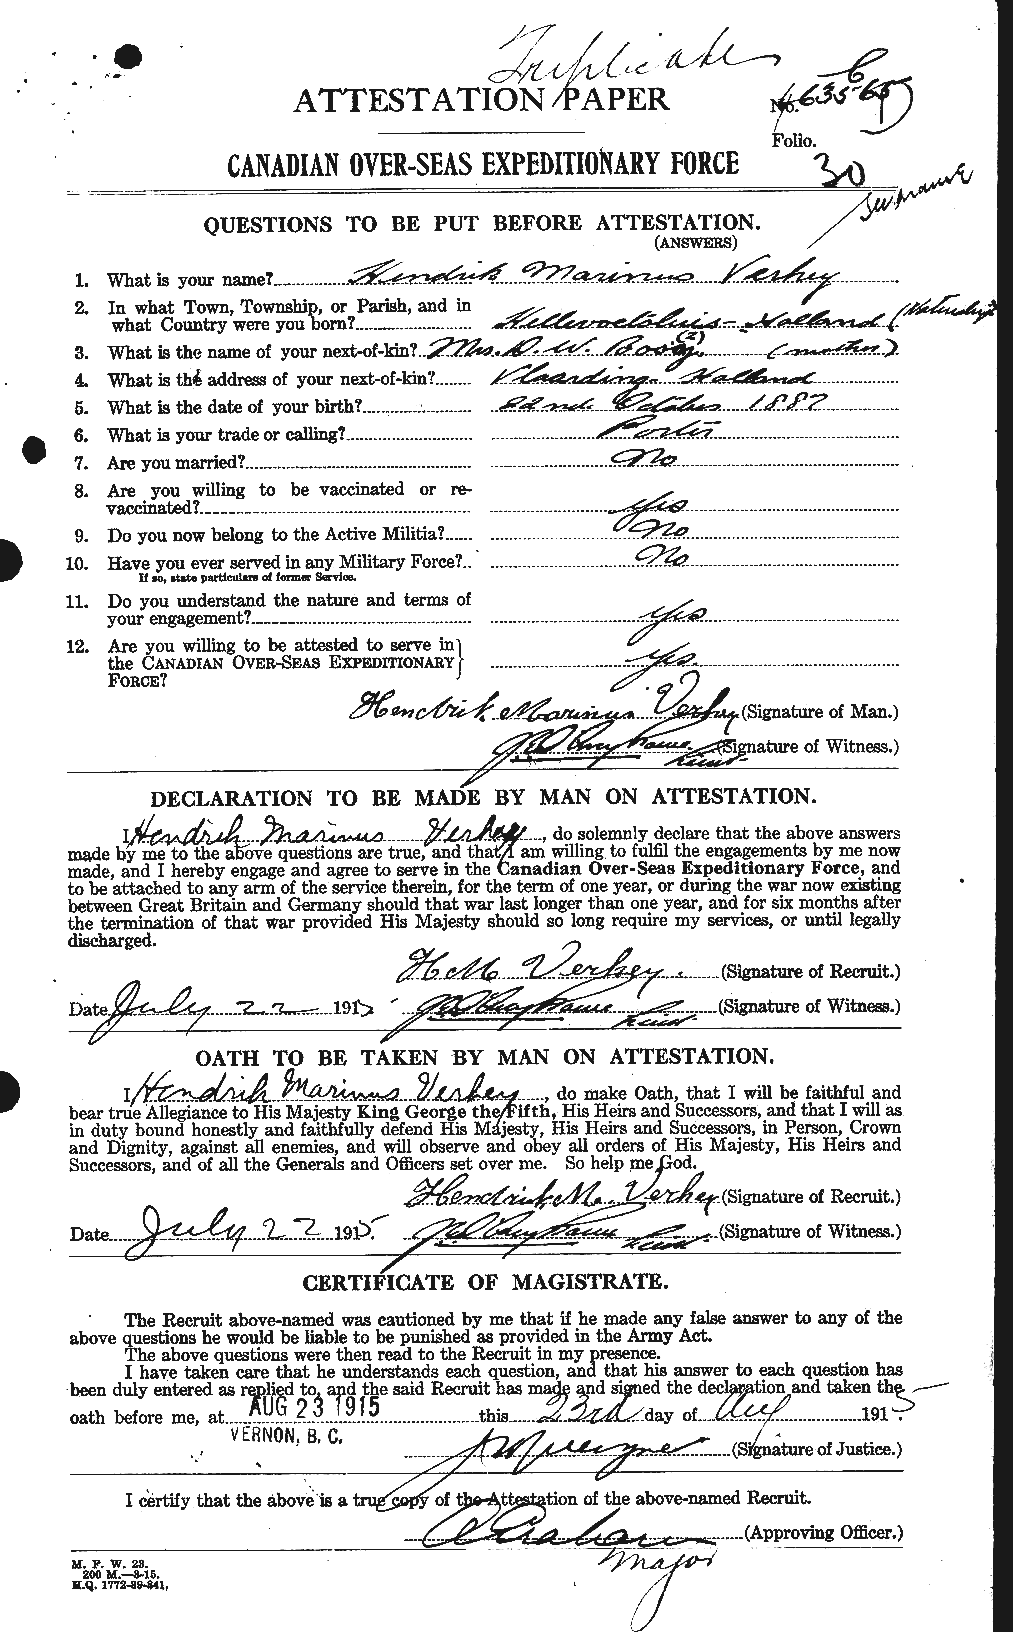 Personnel Records of the First World War - CEF 649499a